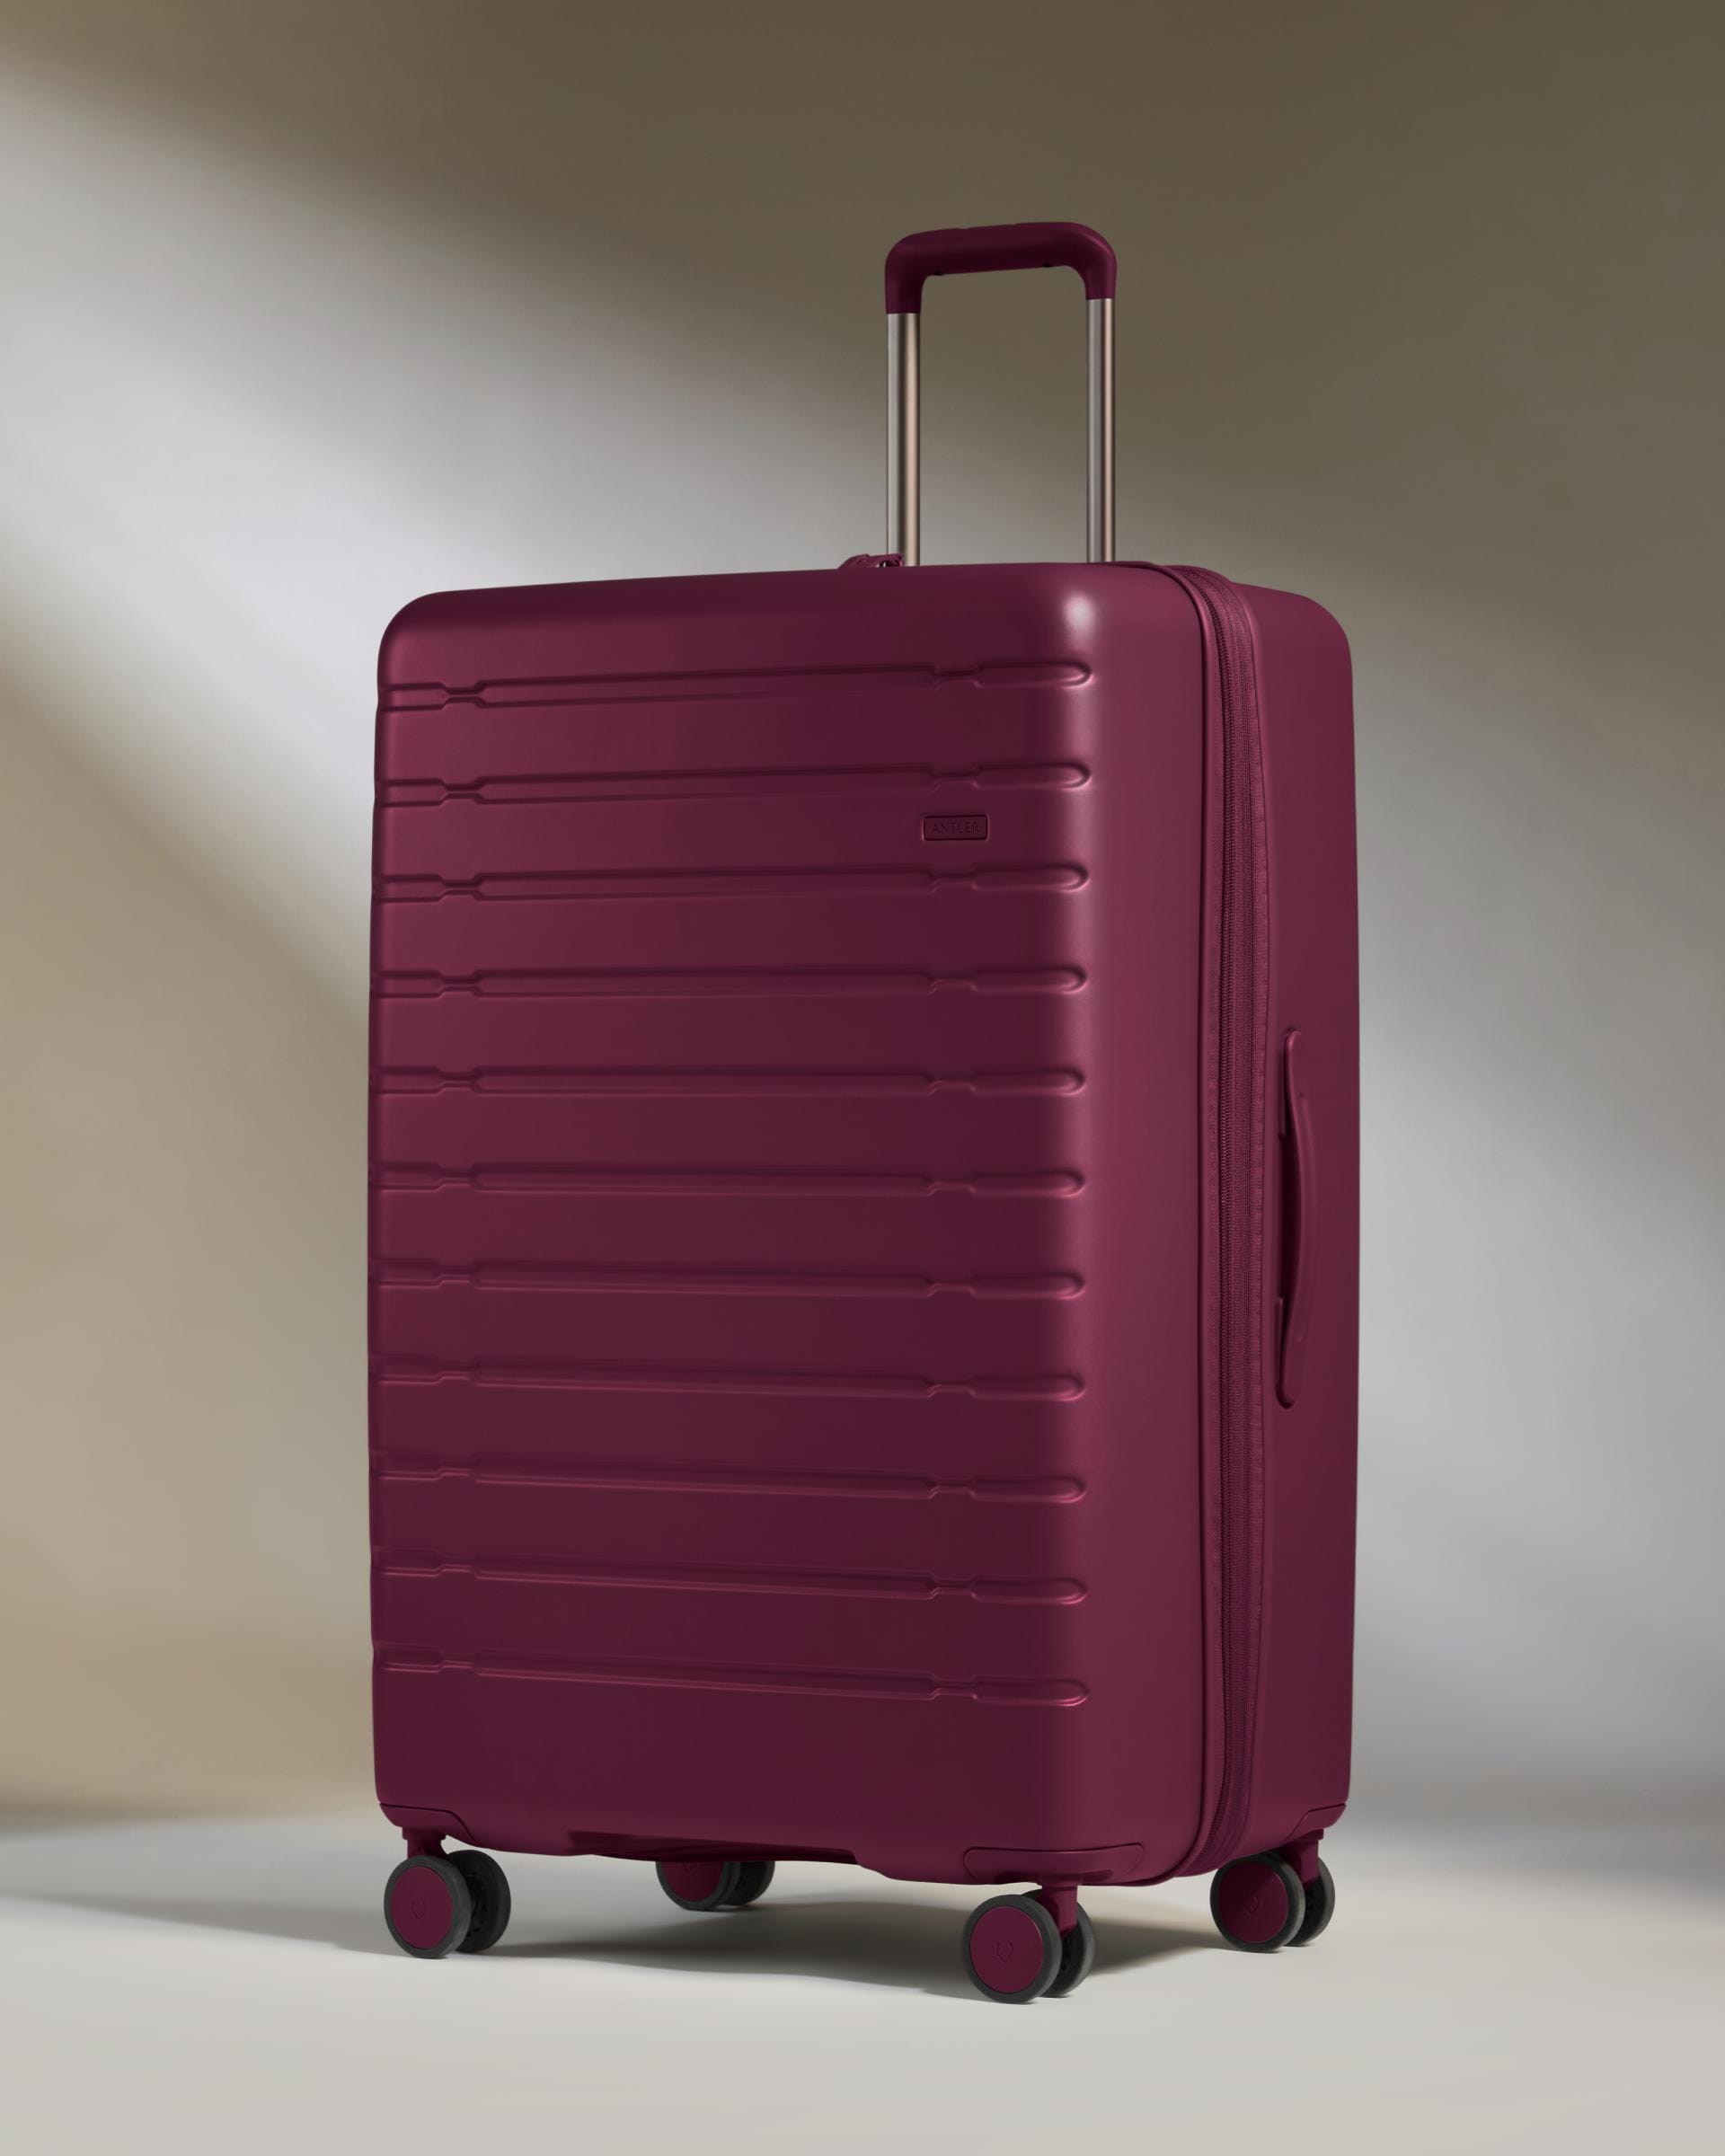 View Antler Stamford 20 Large Suitcase In Berry Red Size 345cm x 54cm x 815cm information